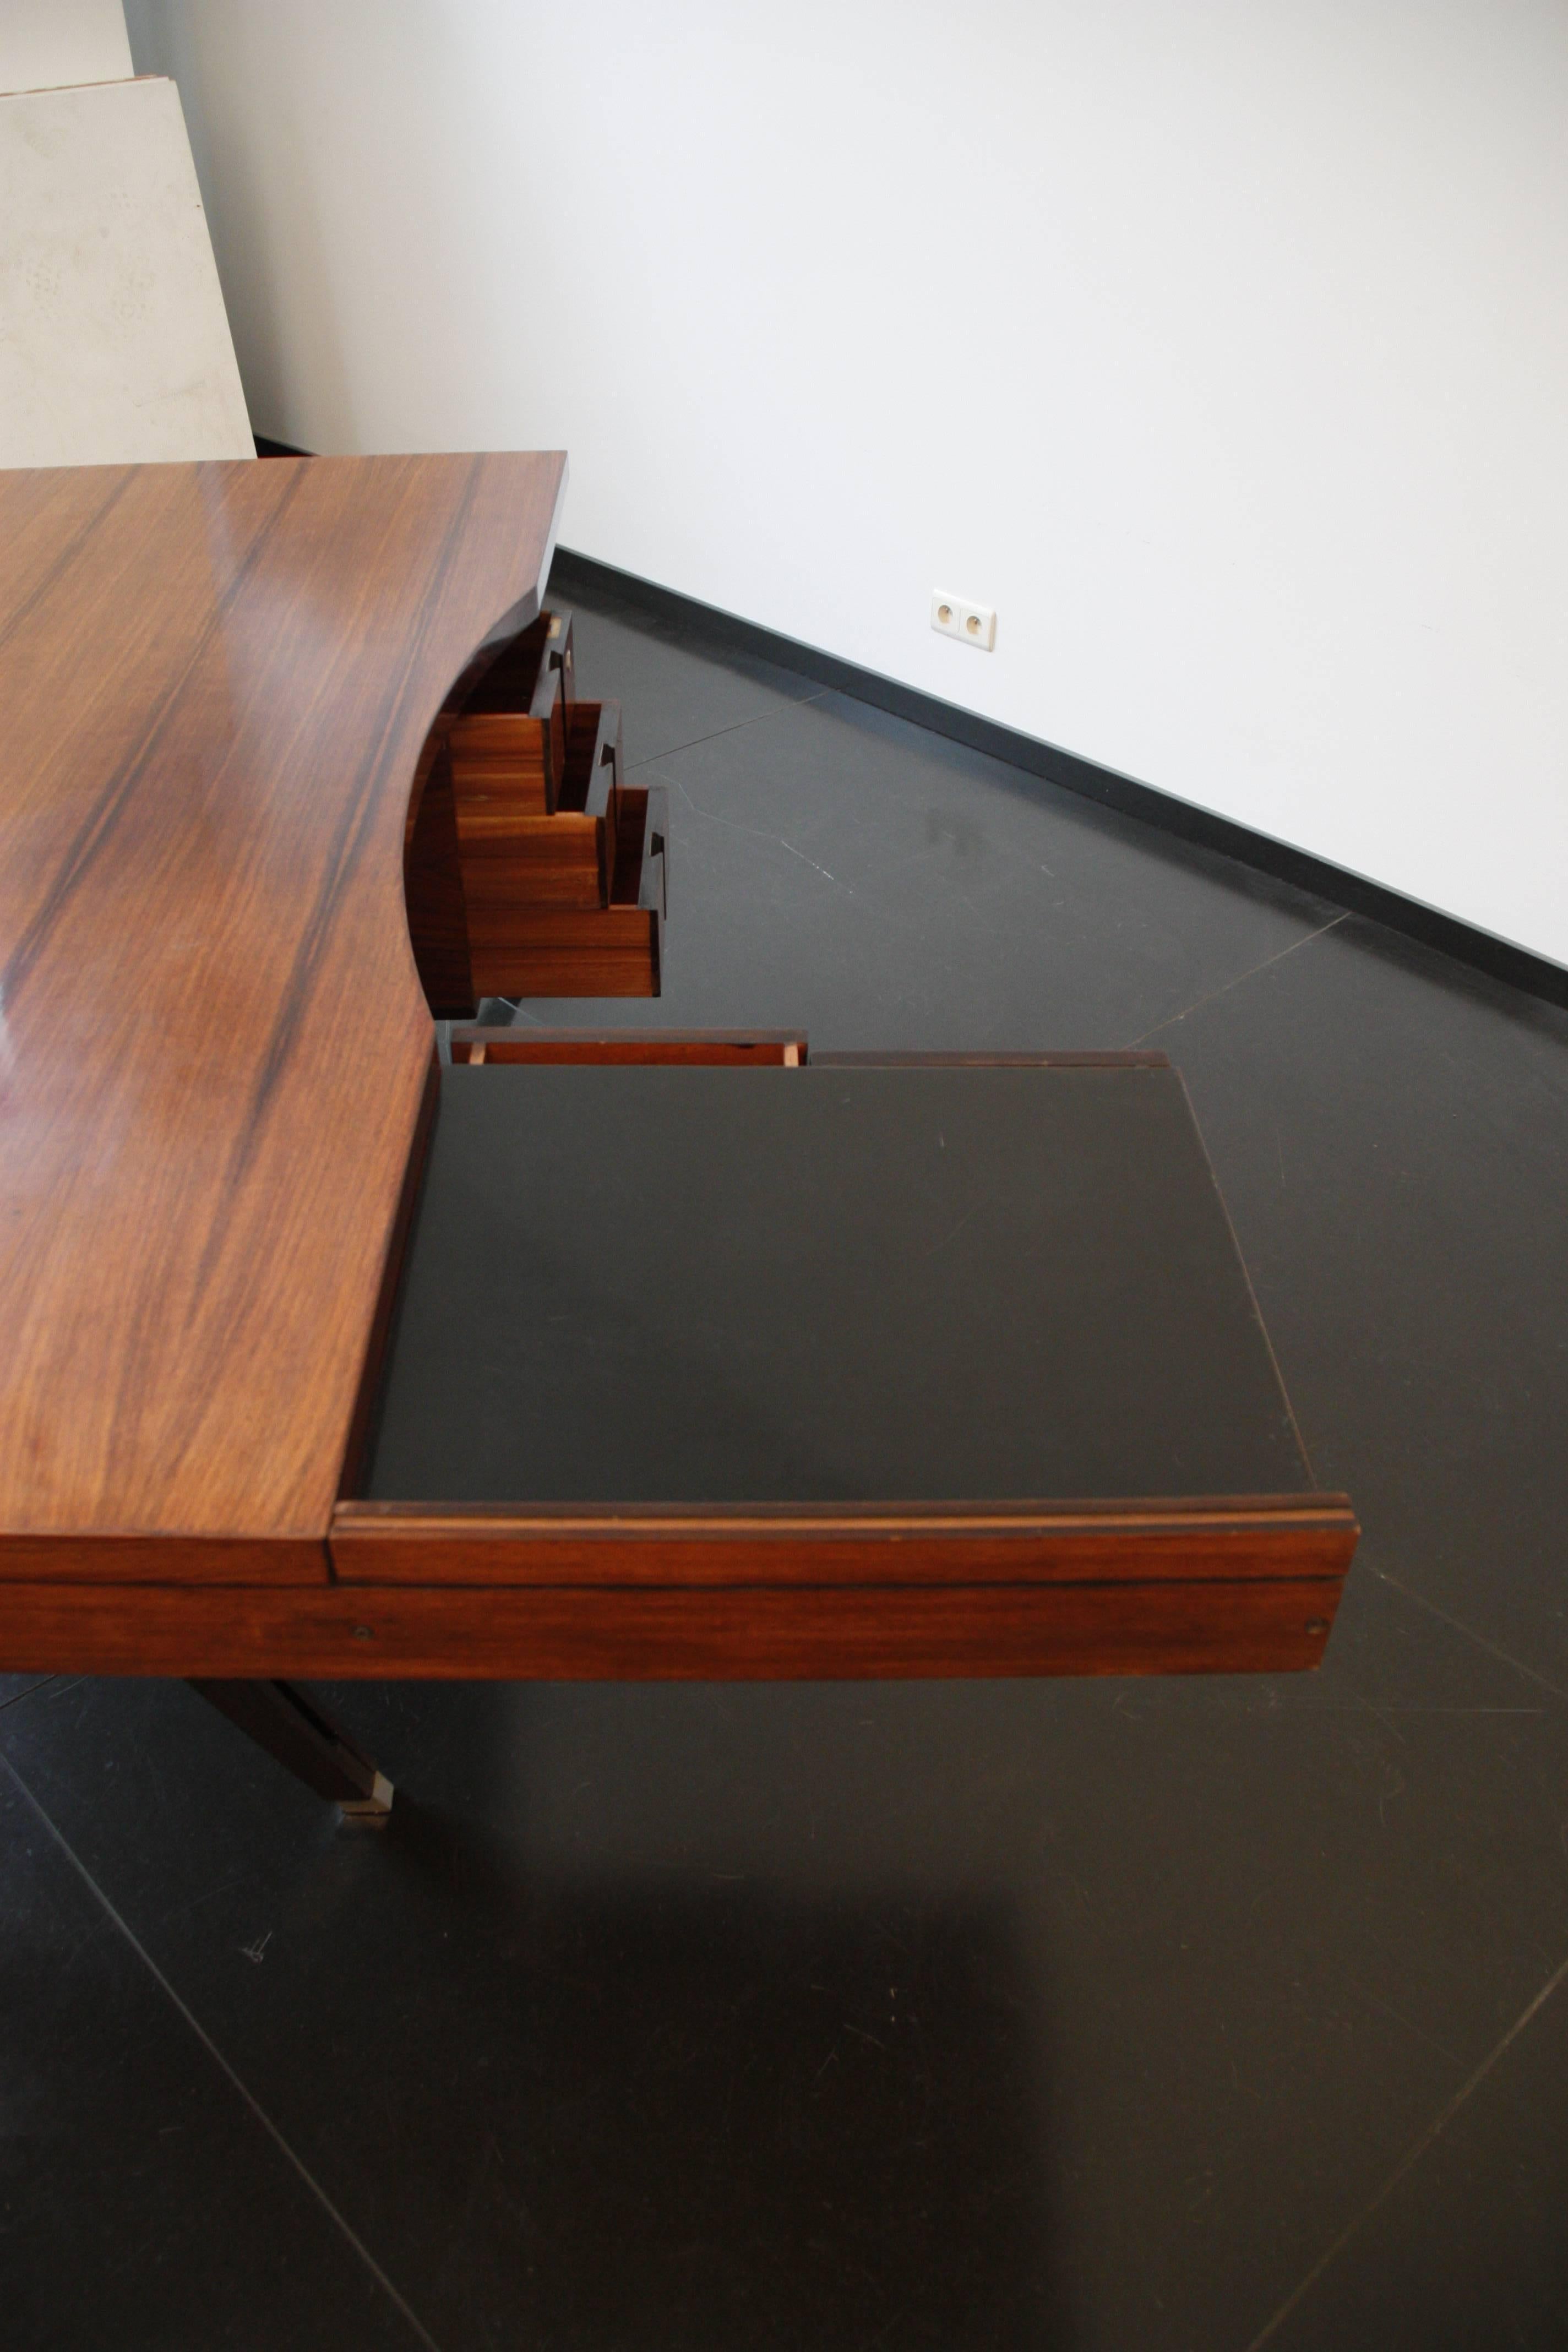 Large vintage desk in polish wood with drawers full drawers and two open sides and lateral elements in black Formica and polish wood design by Ico Parisi manufactured by MIM, Italy, circa 1955.
Measures: 82.67in x 39.37in depth 28.74in H. Side